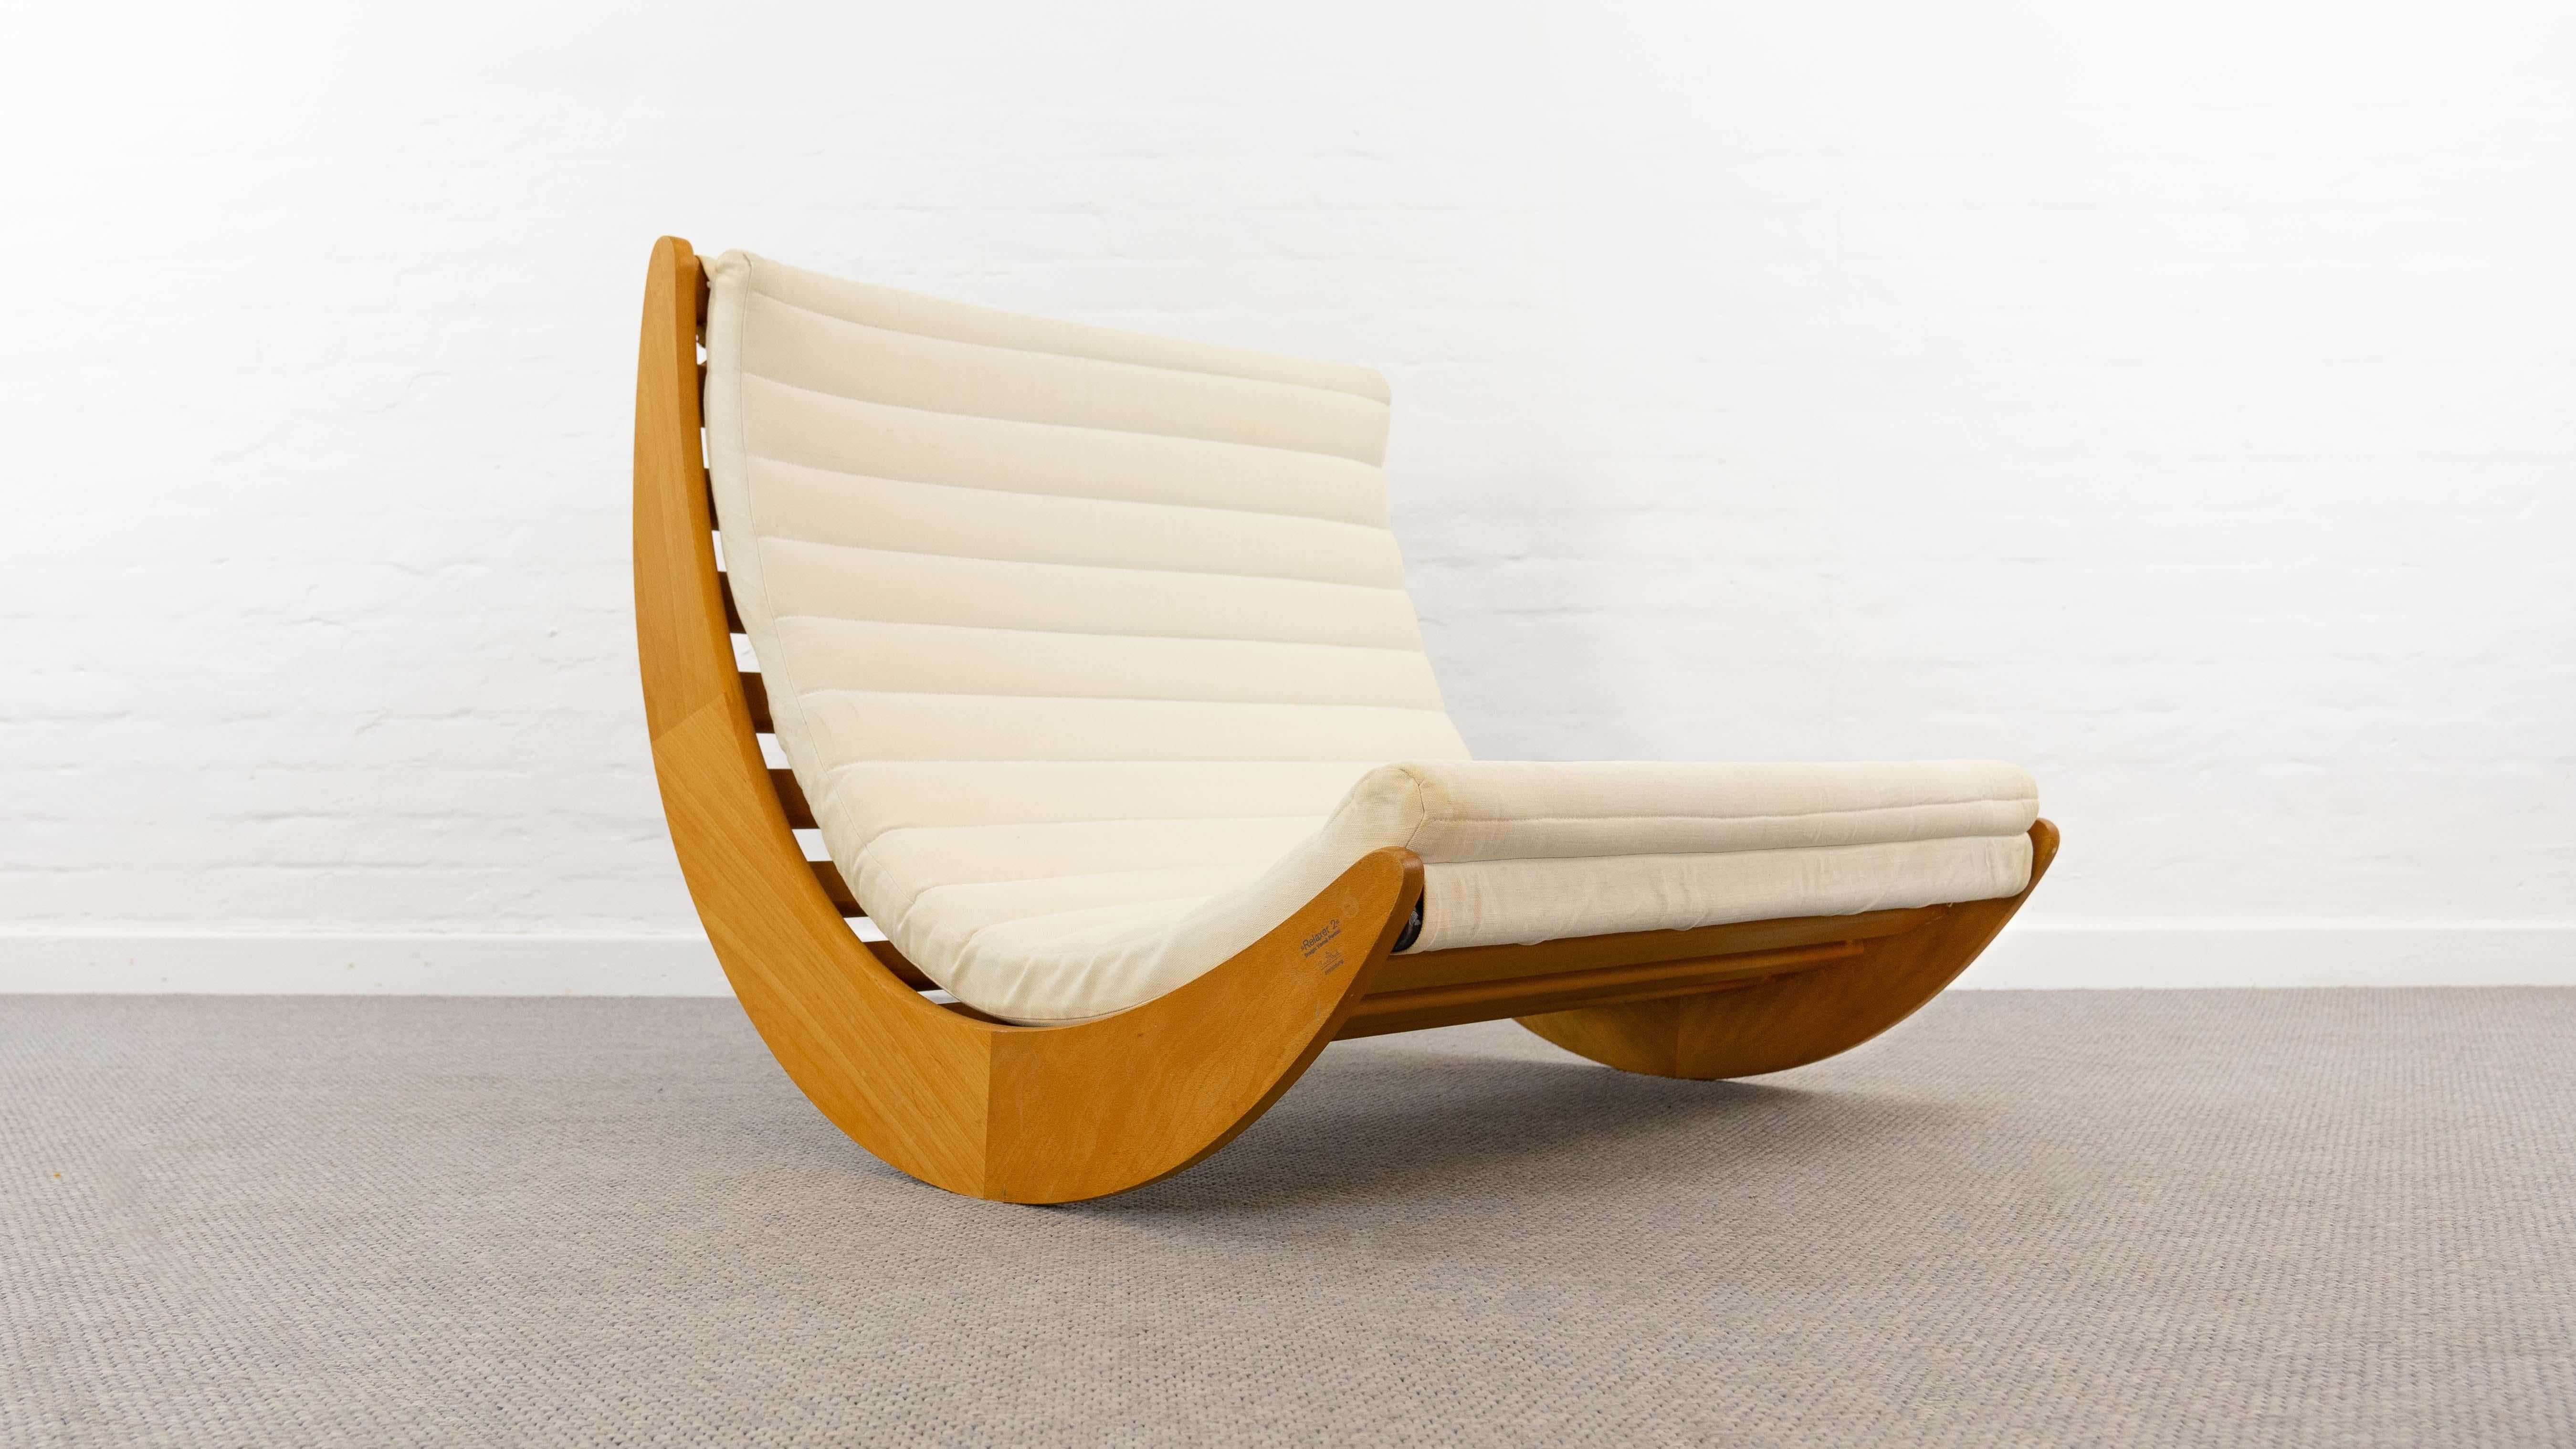 Tandem Relaxer rocking chair by famous Danish designer Verner Panton. Manufactured by Rosenthal Studio-Line, Germany, 1974. This rocking chair is the very rare version for 2 people. So called 